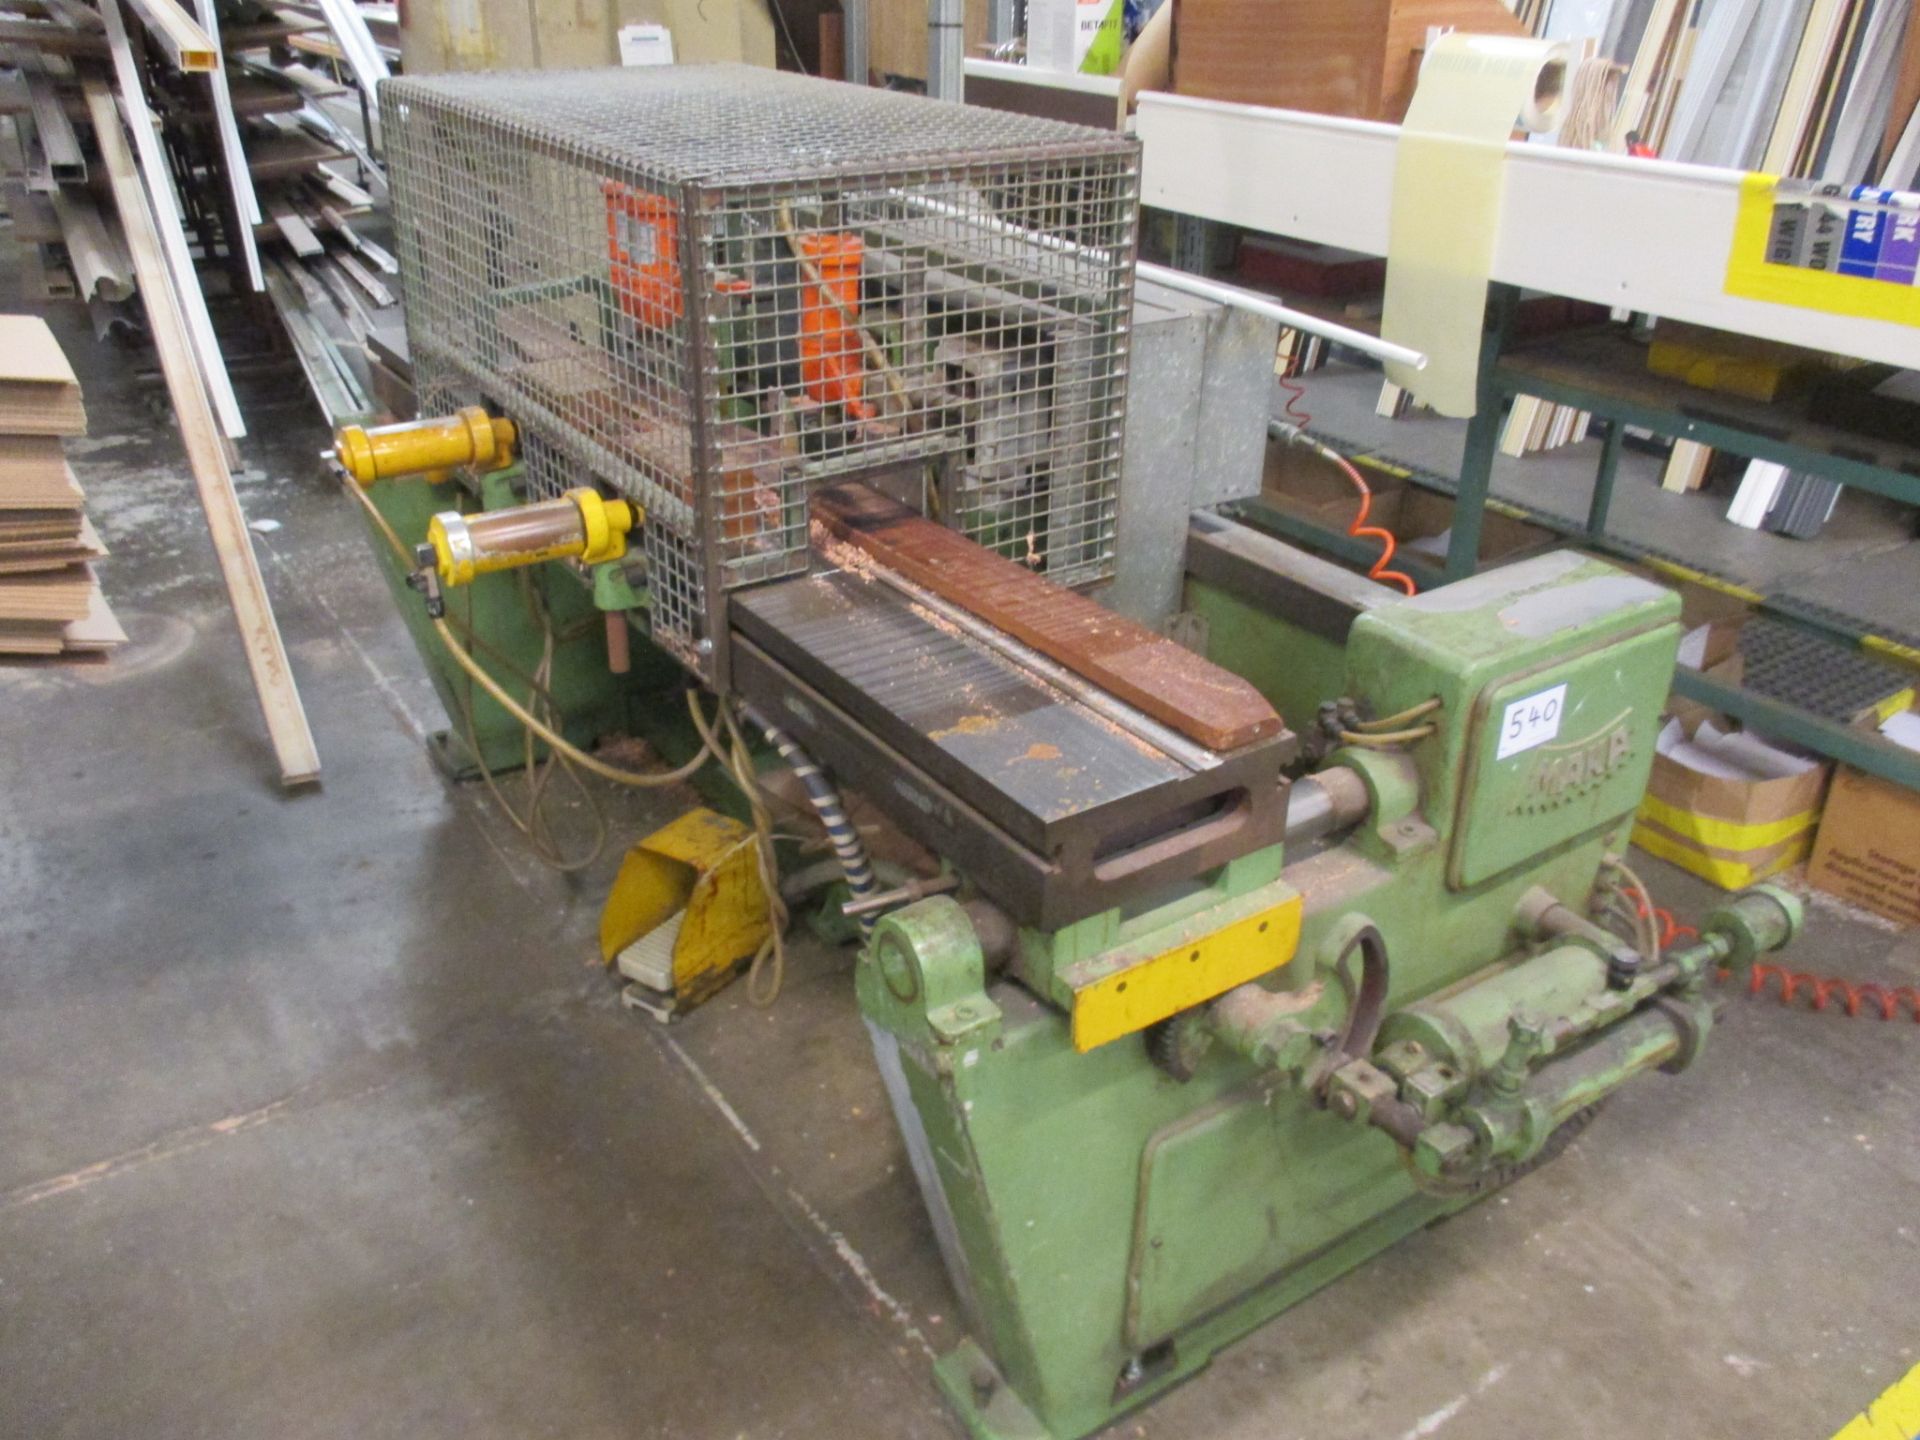 1: Maka, RDB-6, Slotting Mortiser Machine With DCS UniMaster Extraction, Serial Number: 834721, Year